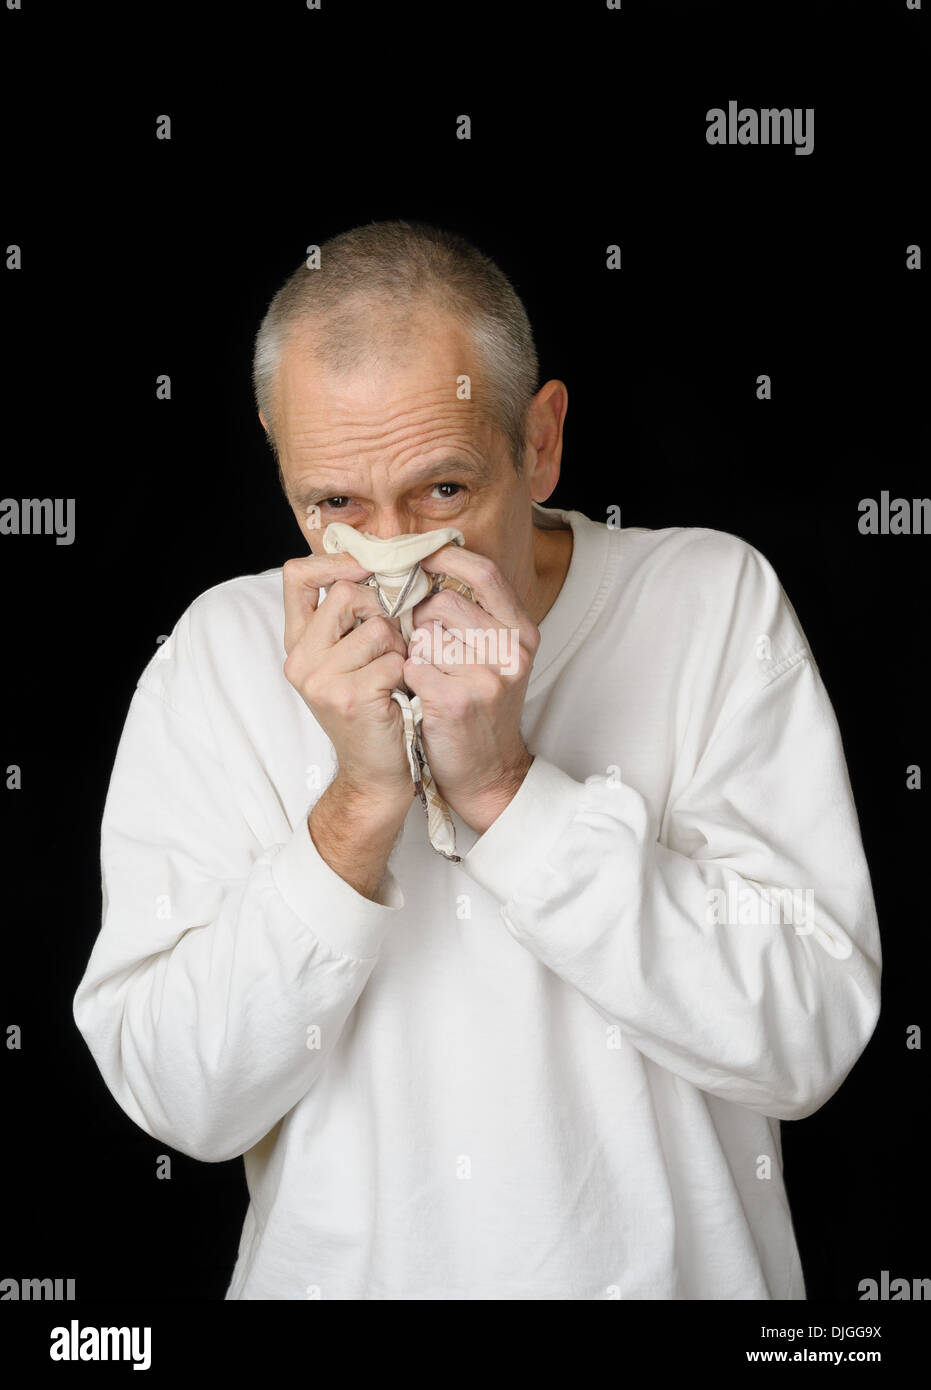 A sick man with cold holding an handkerchief in hands and blowing his nose Stock Photo